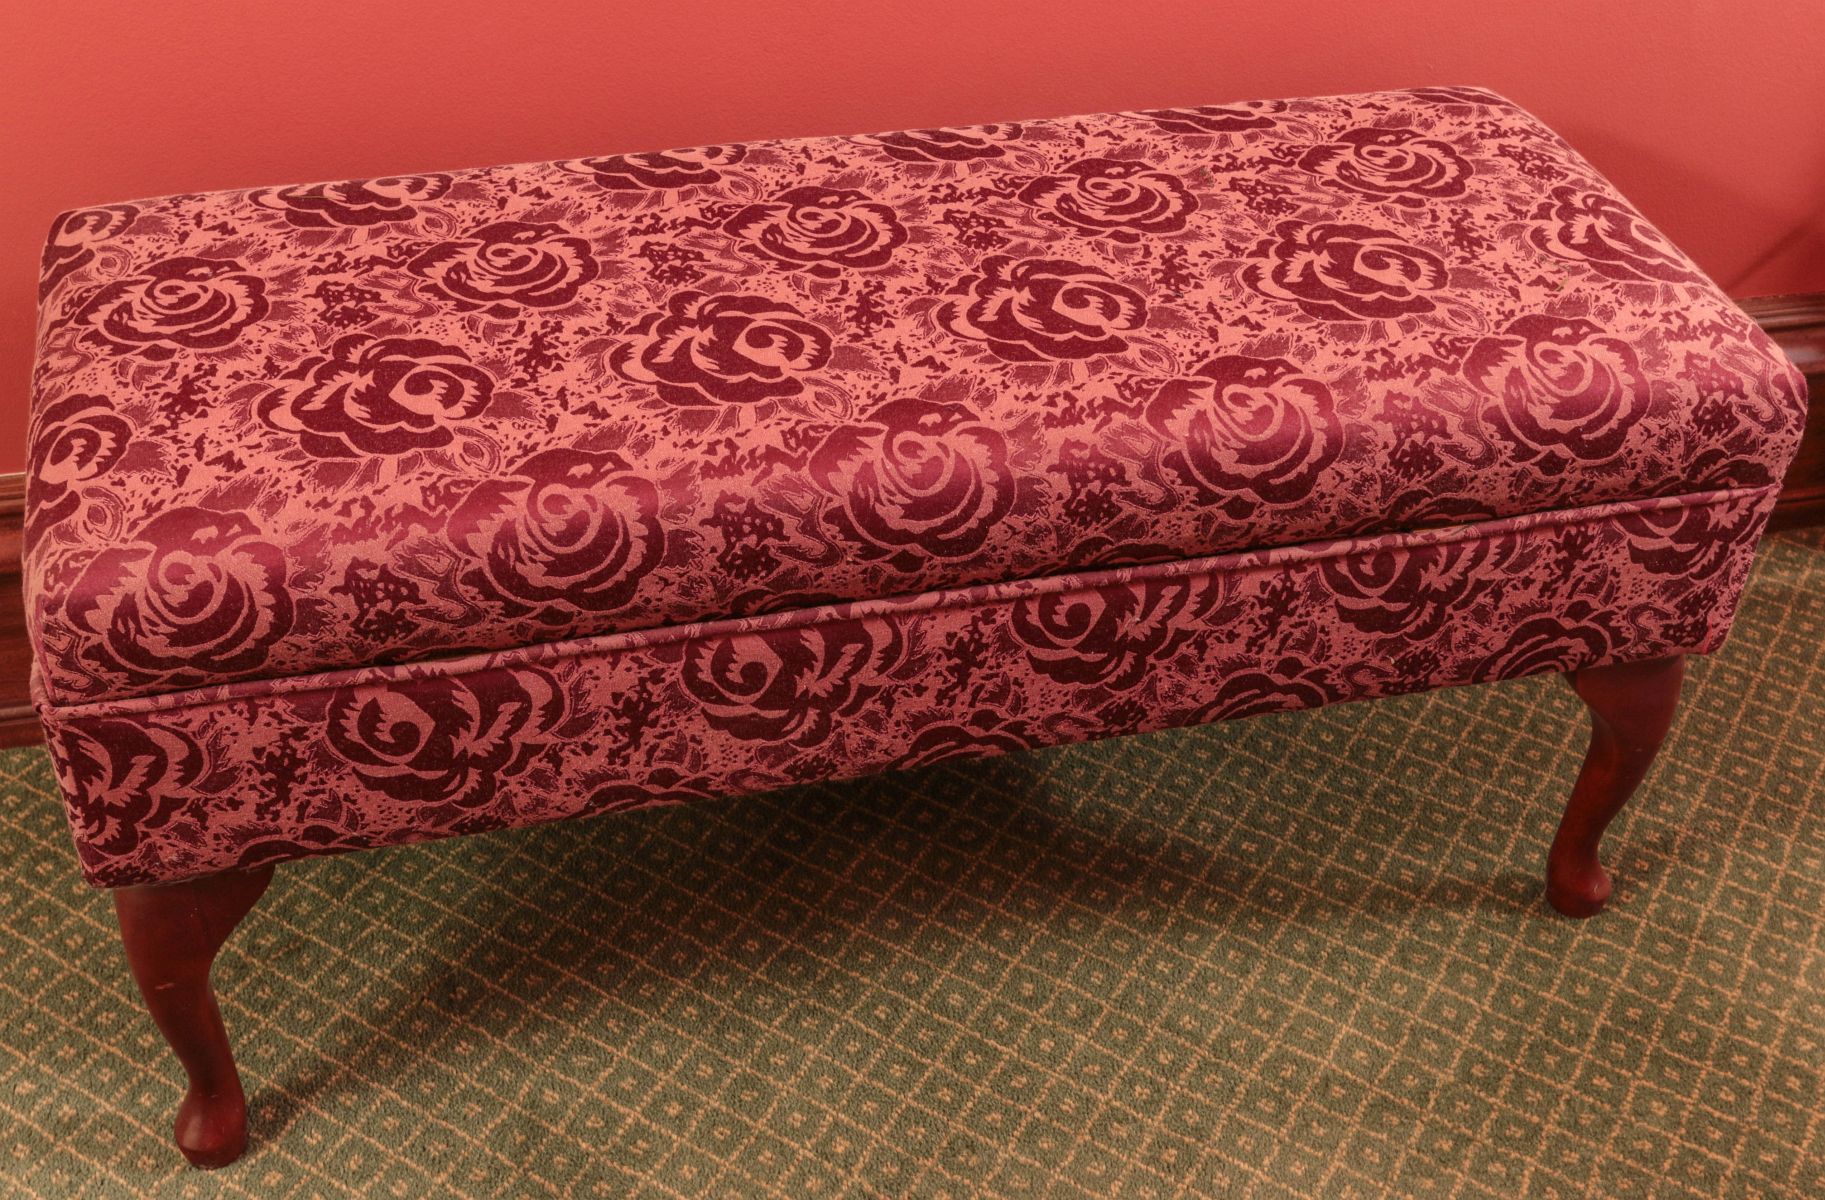 AN UPHOLSTERED BENCH